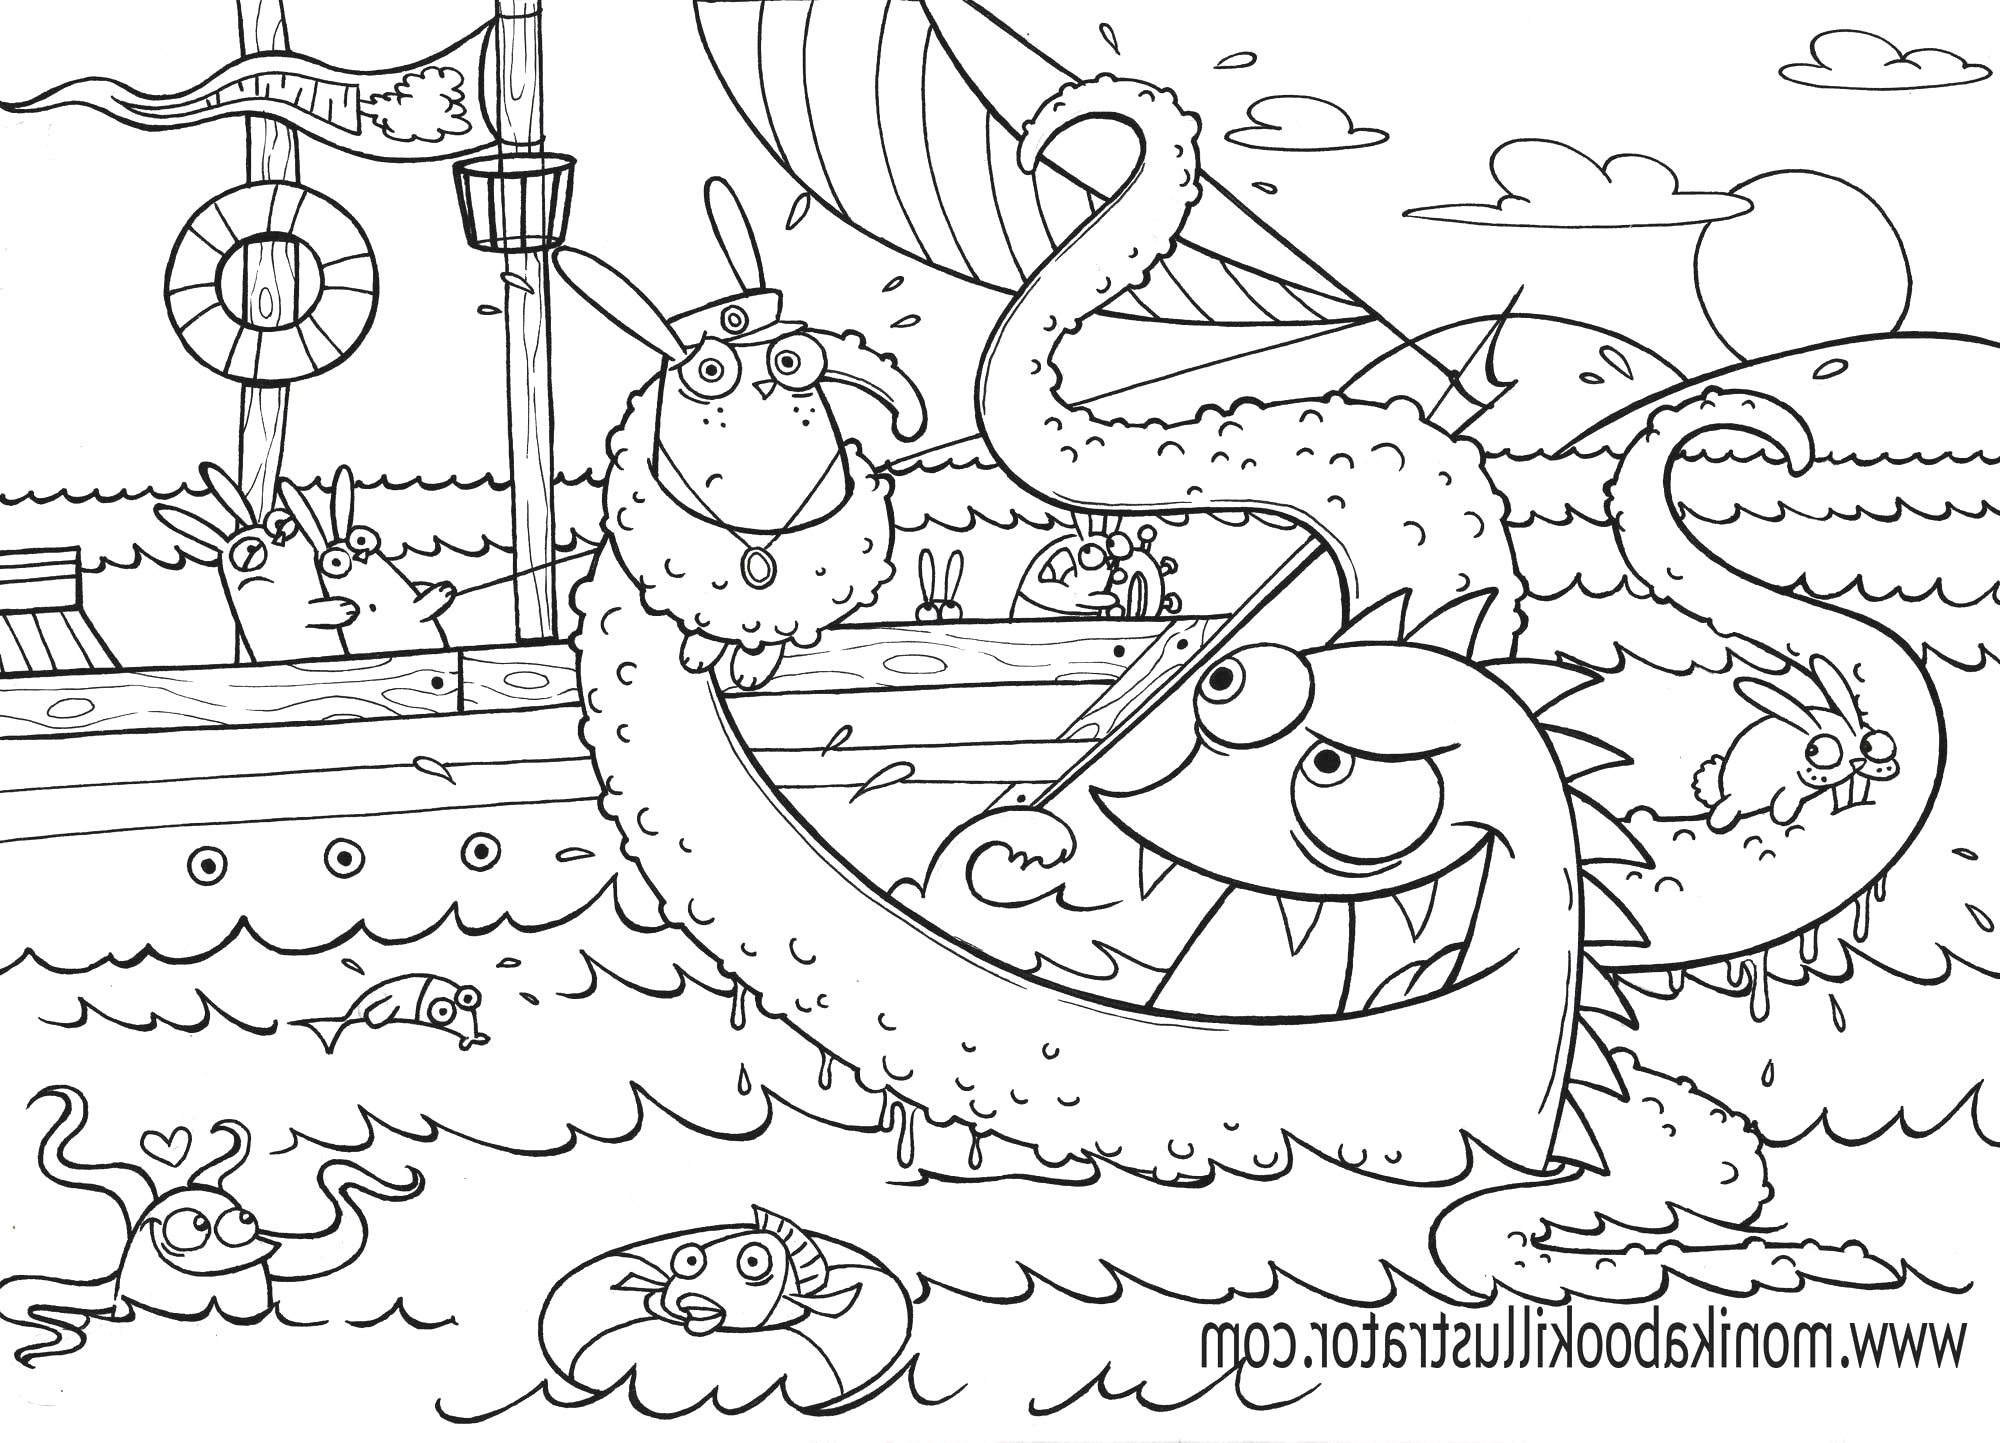 Voltron Coloring Pages Free Voltron Coloring Pages Thelambingan